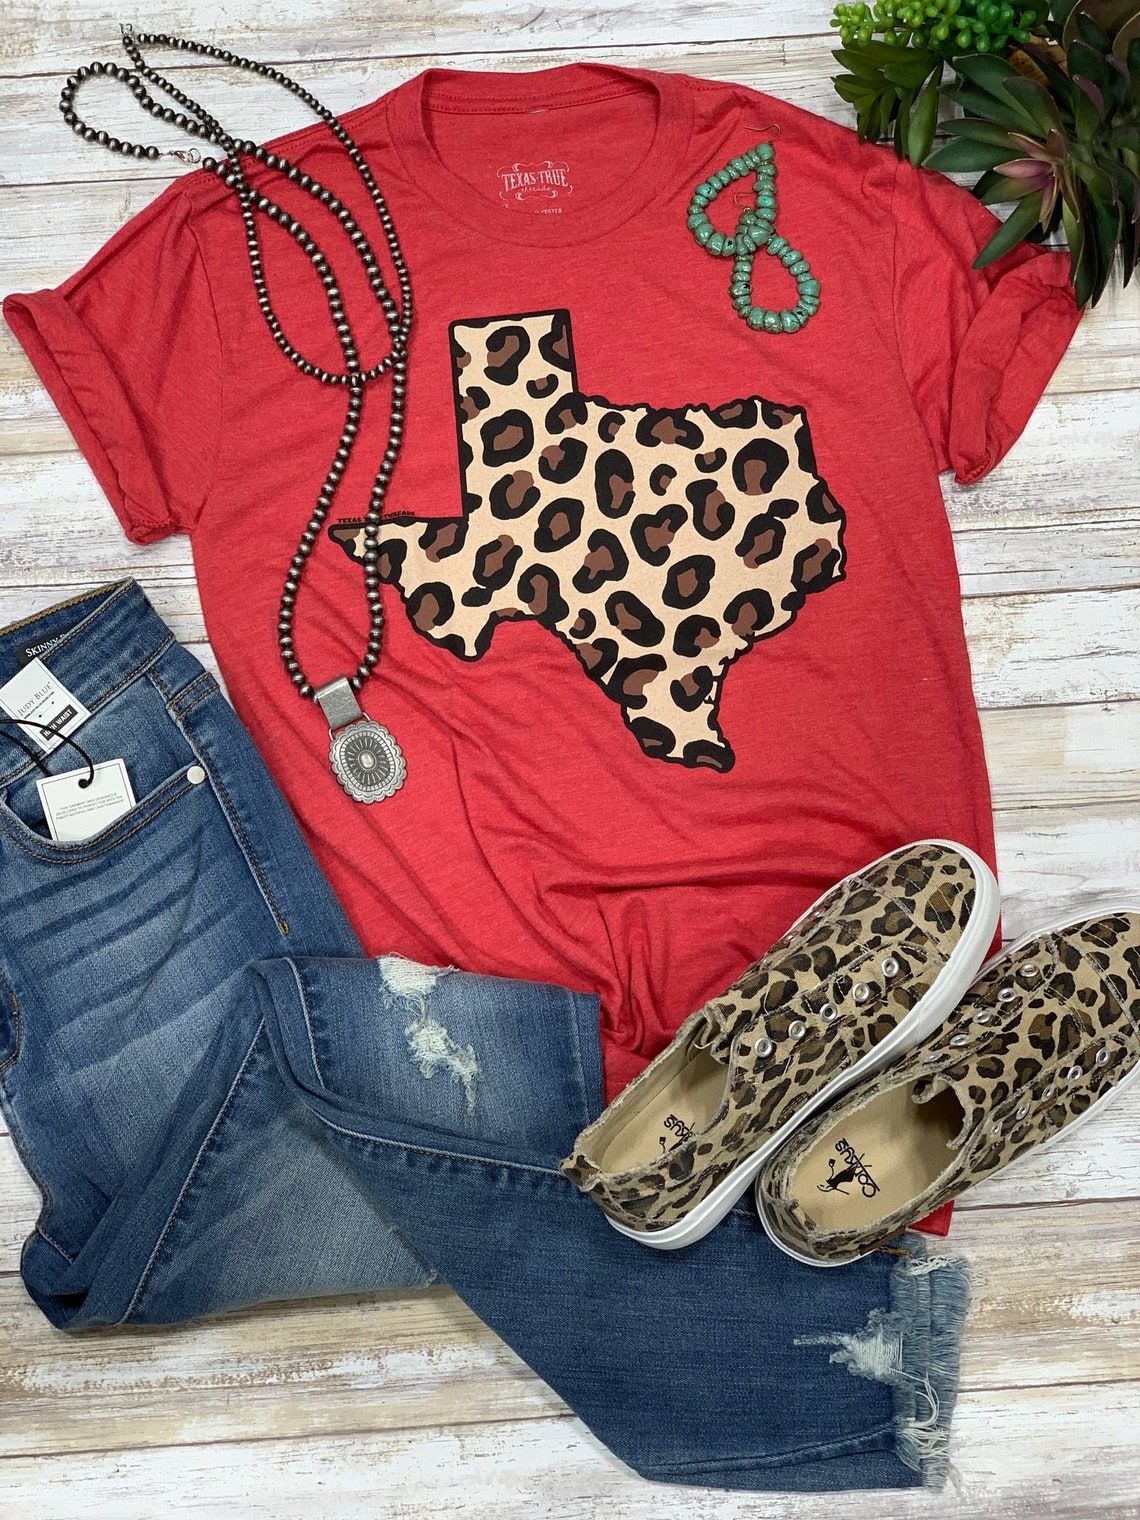 Big Red Texas by Texas True Threads Women's Graphic | Etsy